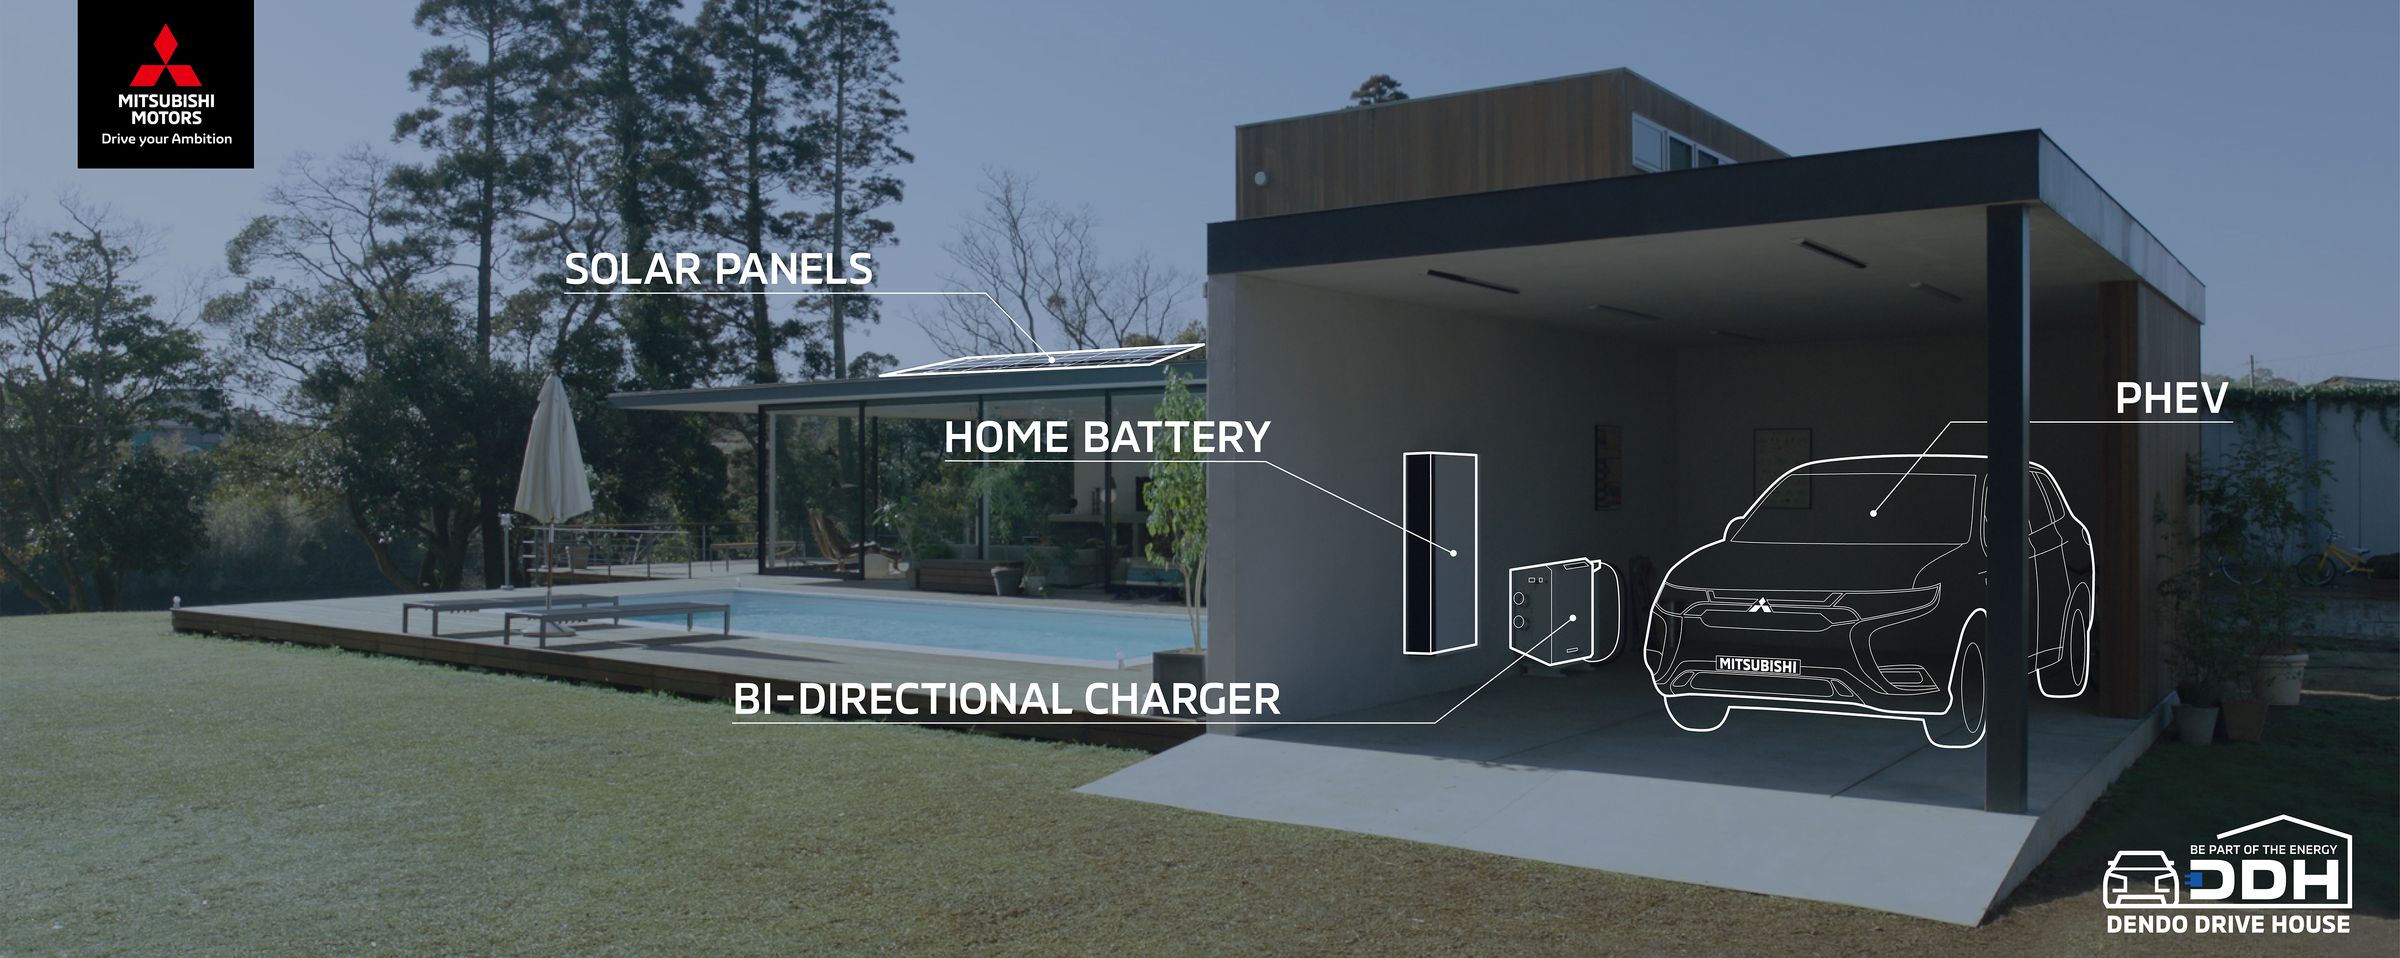 The full Dendo Drive House system consists of solar panels, a home battery, and a bi-directional charger for your car. 